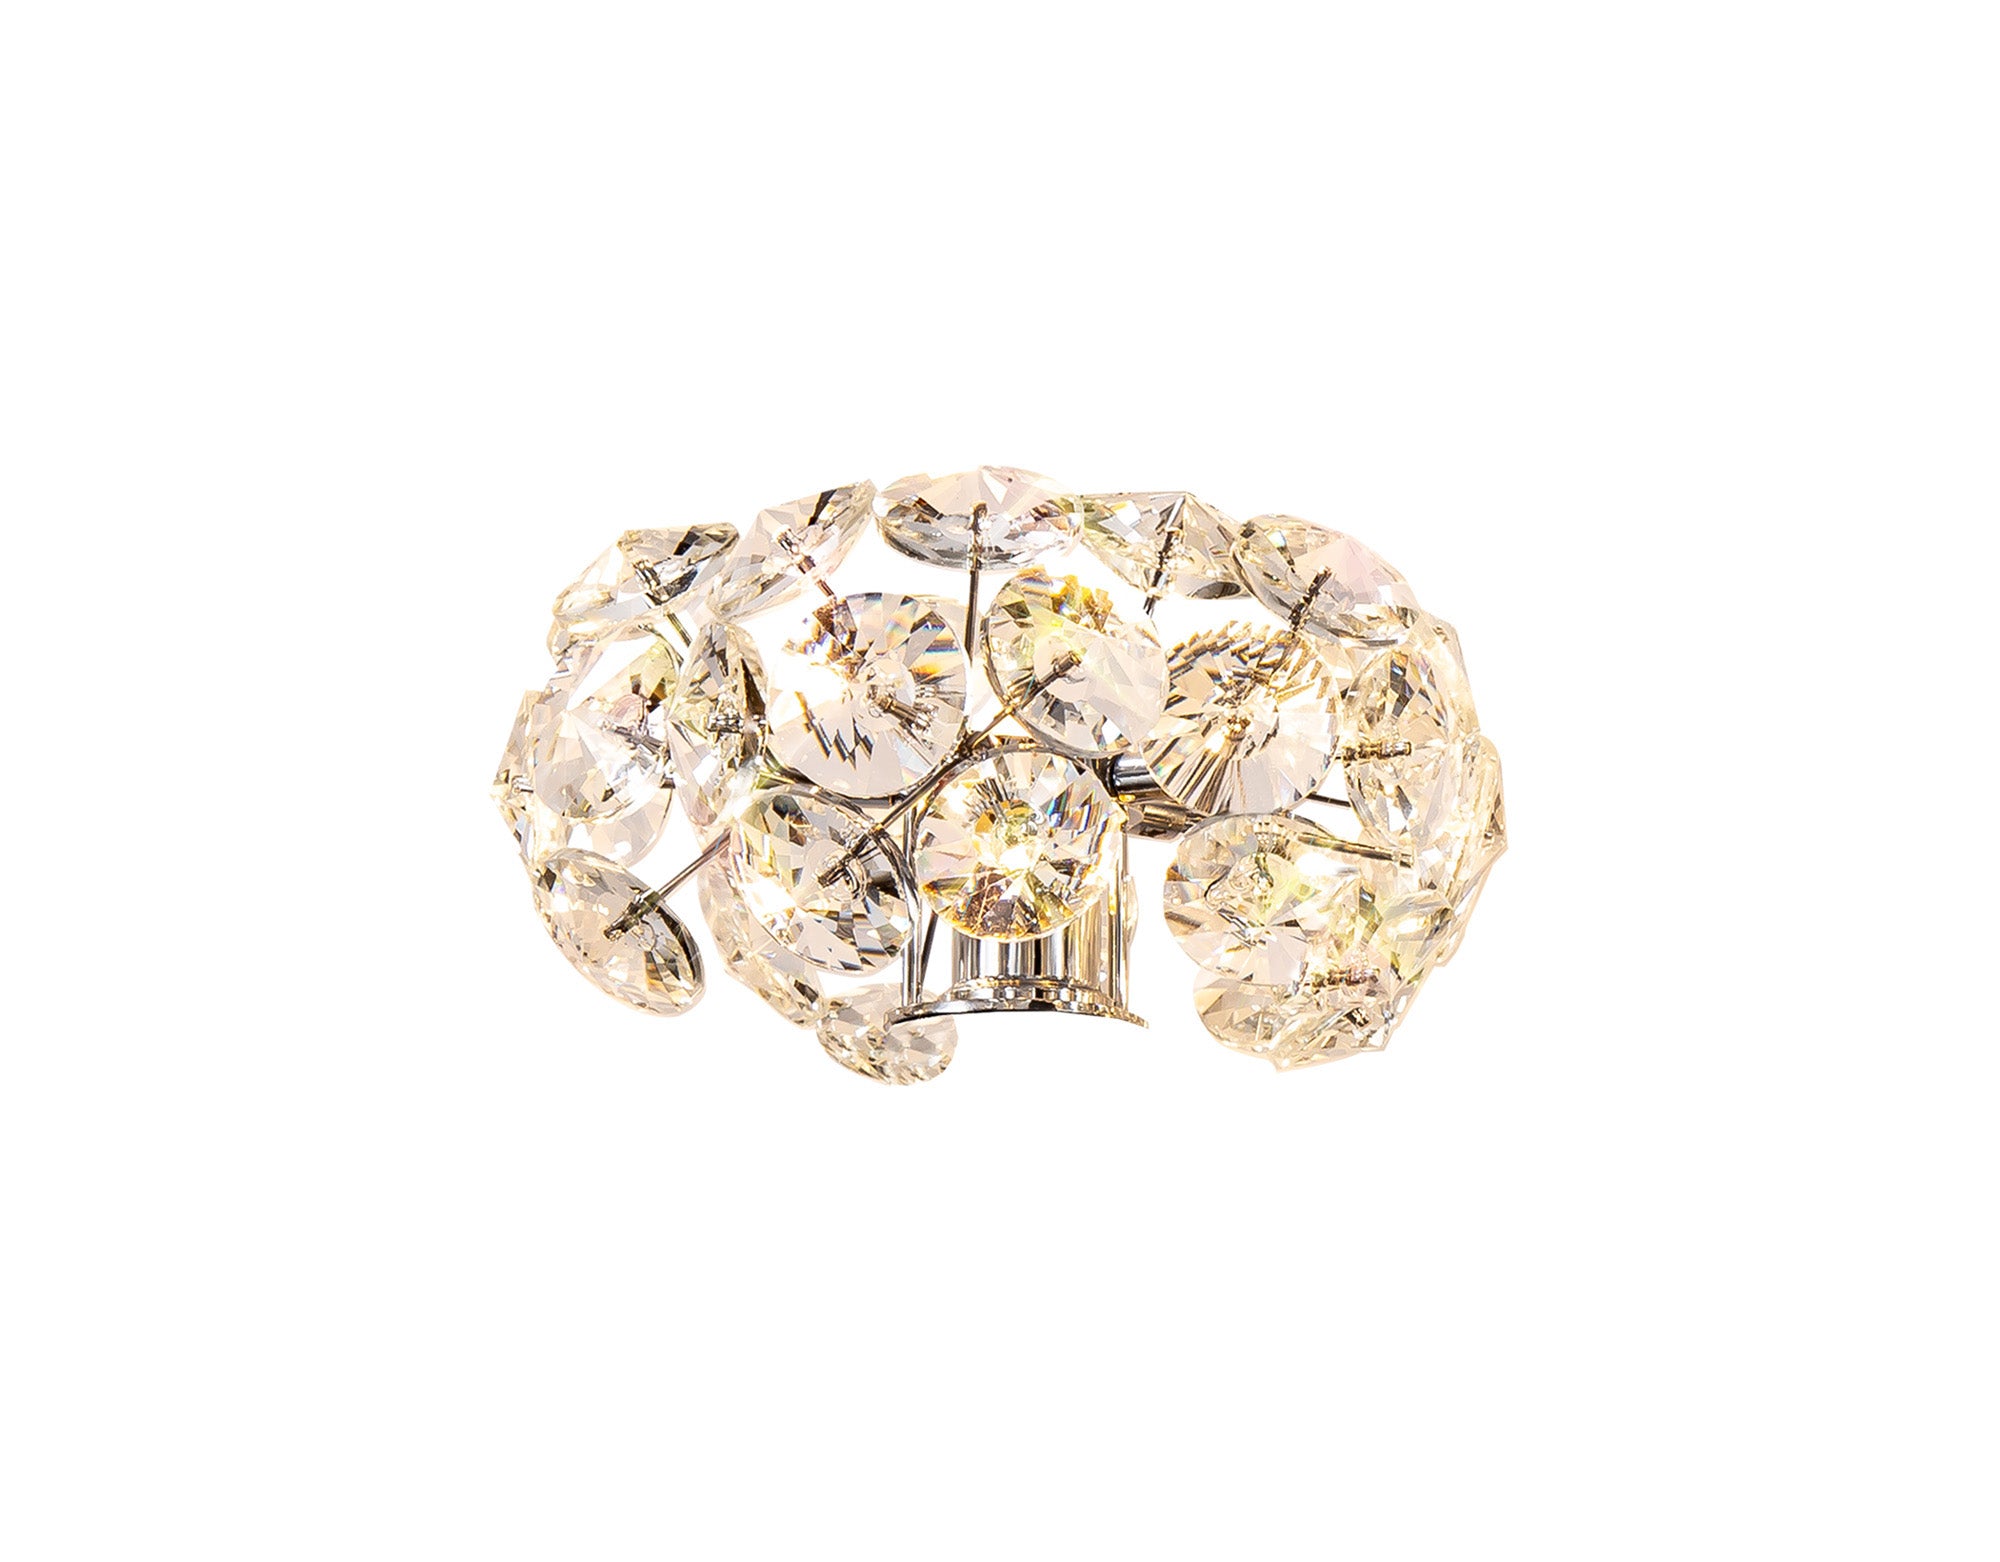 Bellagio Non-Electric G9 Shade French Gold/Crystal, Polished Chrome/Crystal